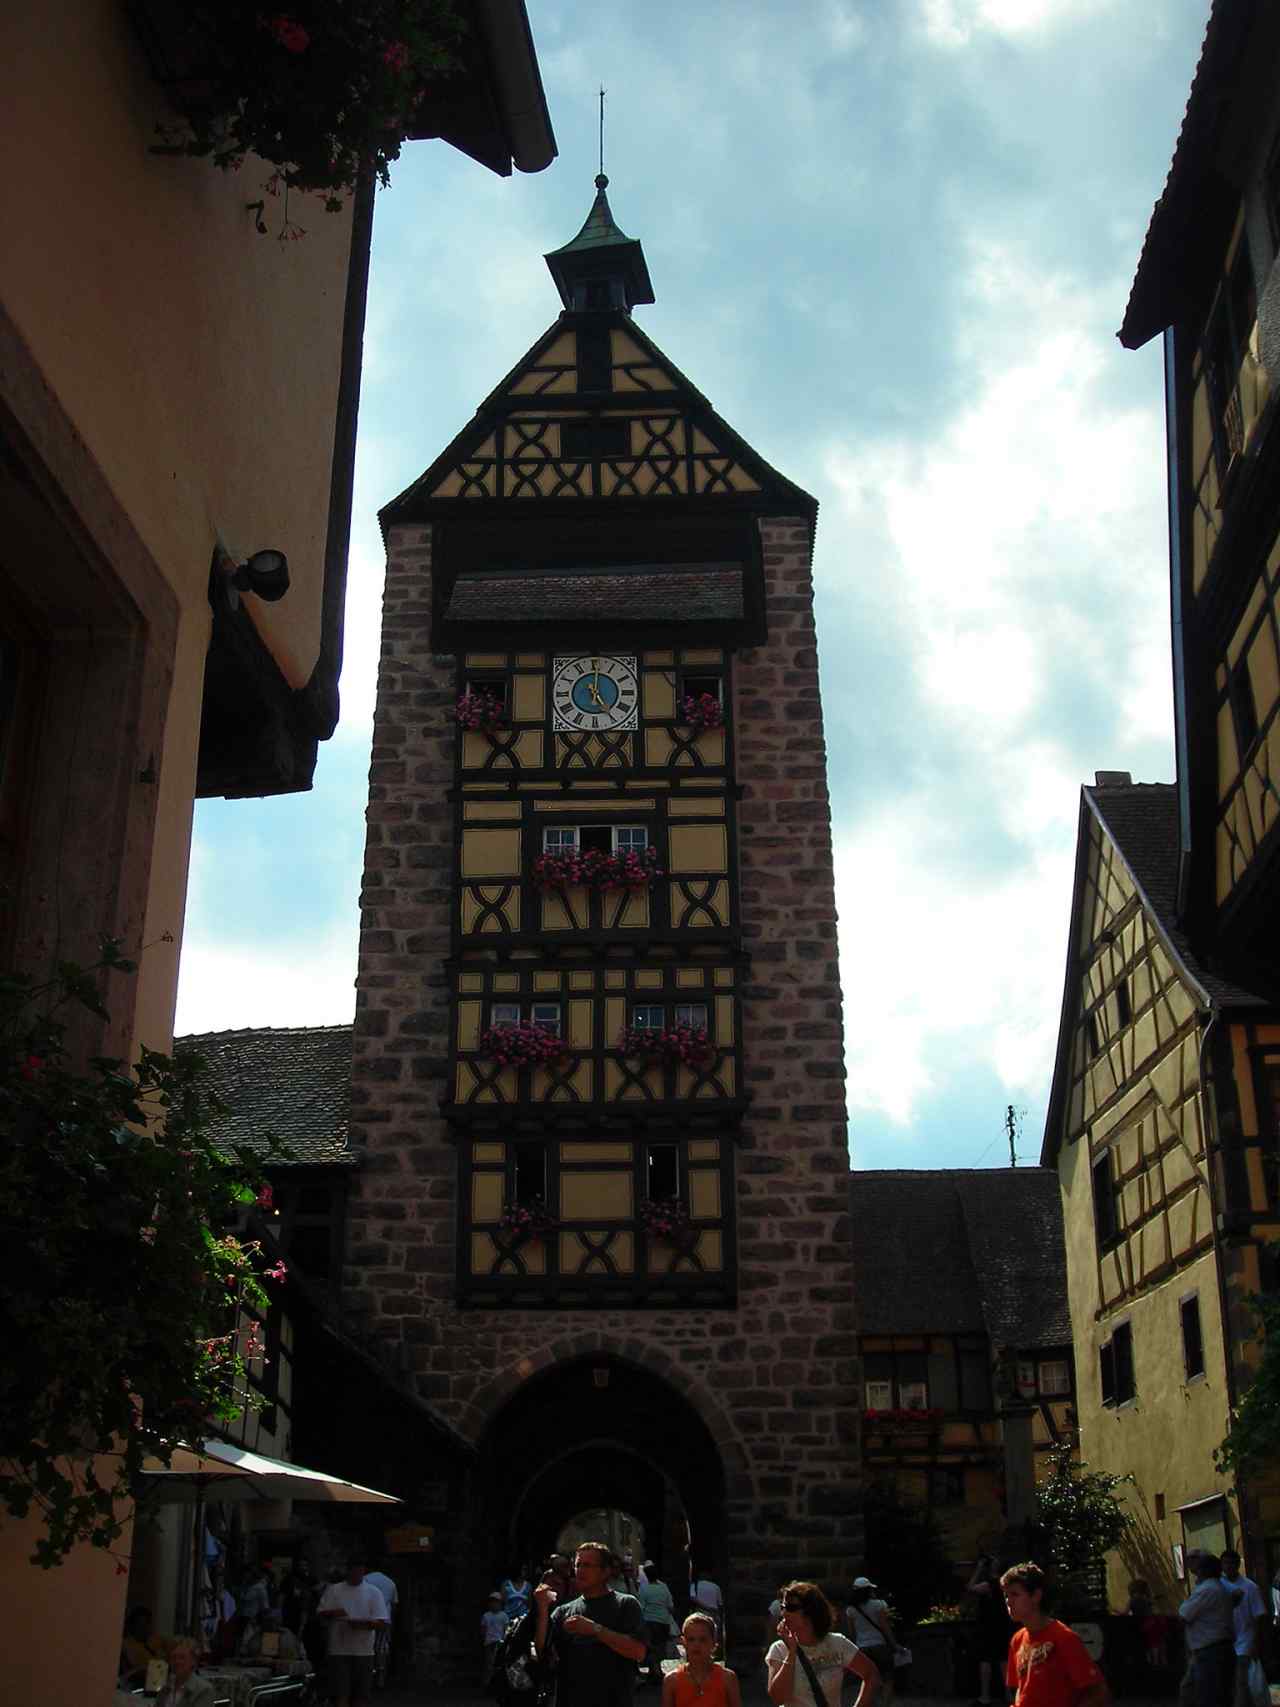 Tower Museum of Thieves, Riquewihr, France